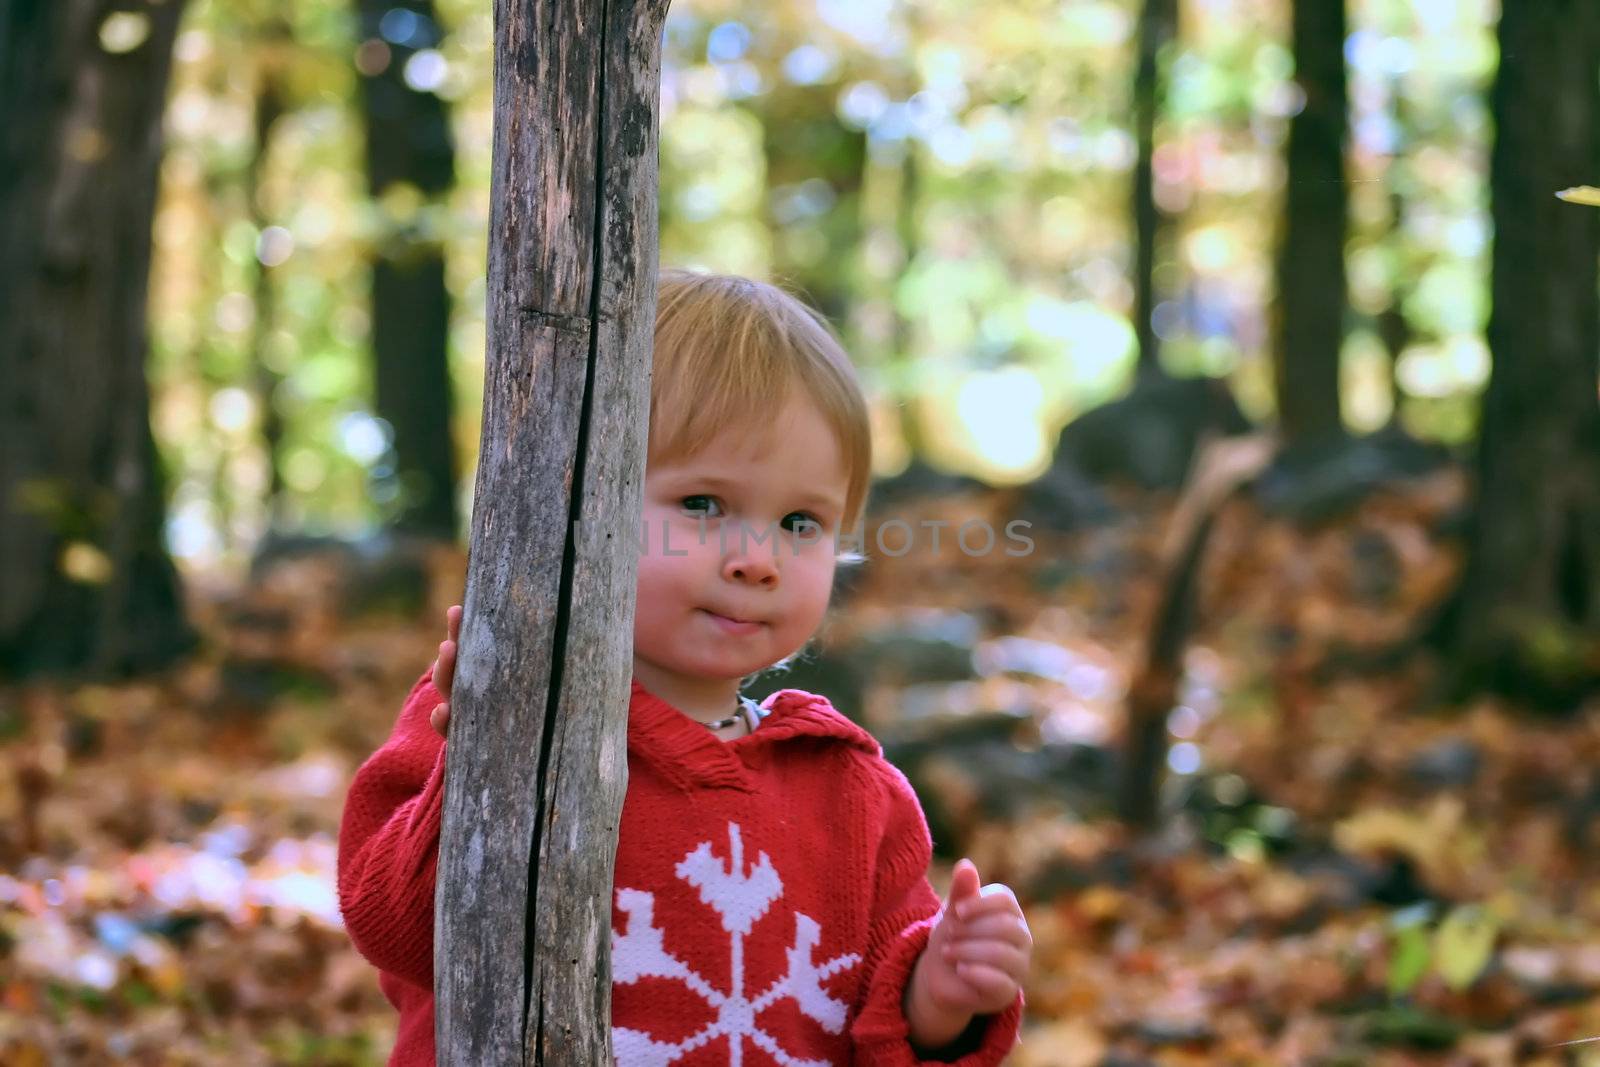 Hide and seek in the woods by Talanis